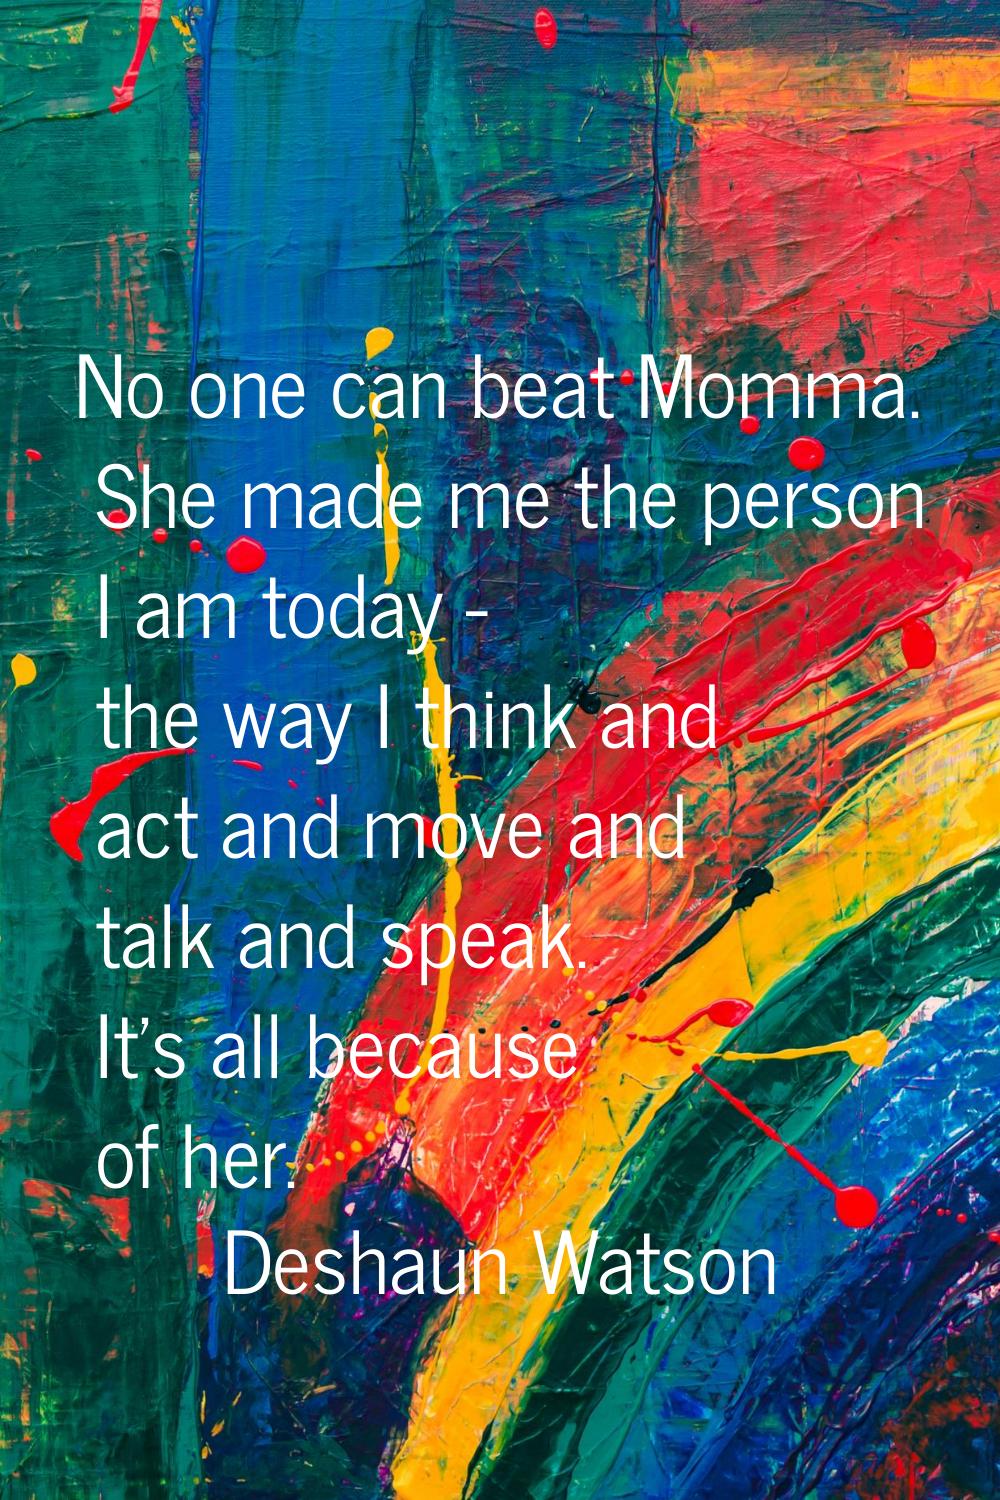 No one can beat Momma. She made me the person I am today - the way I think and act and move and tal